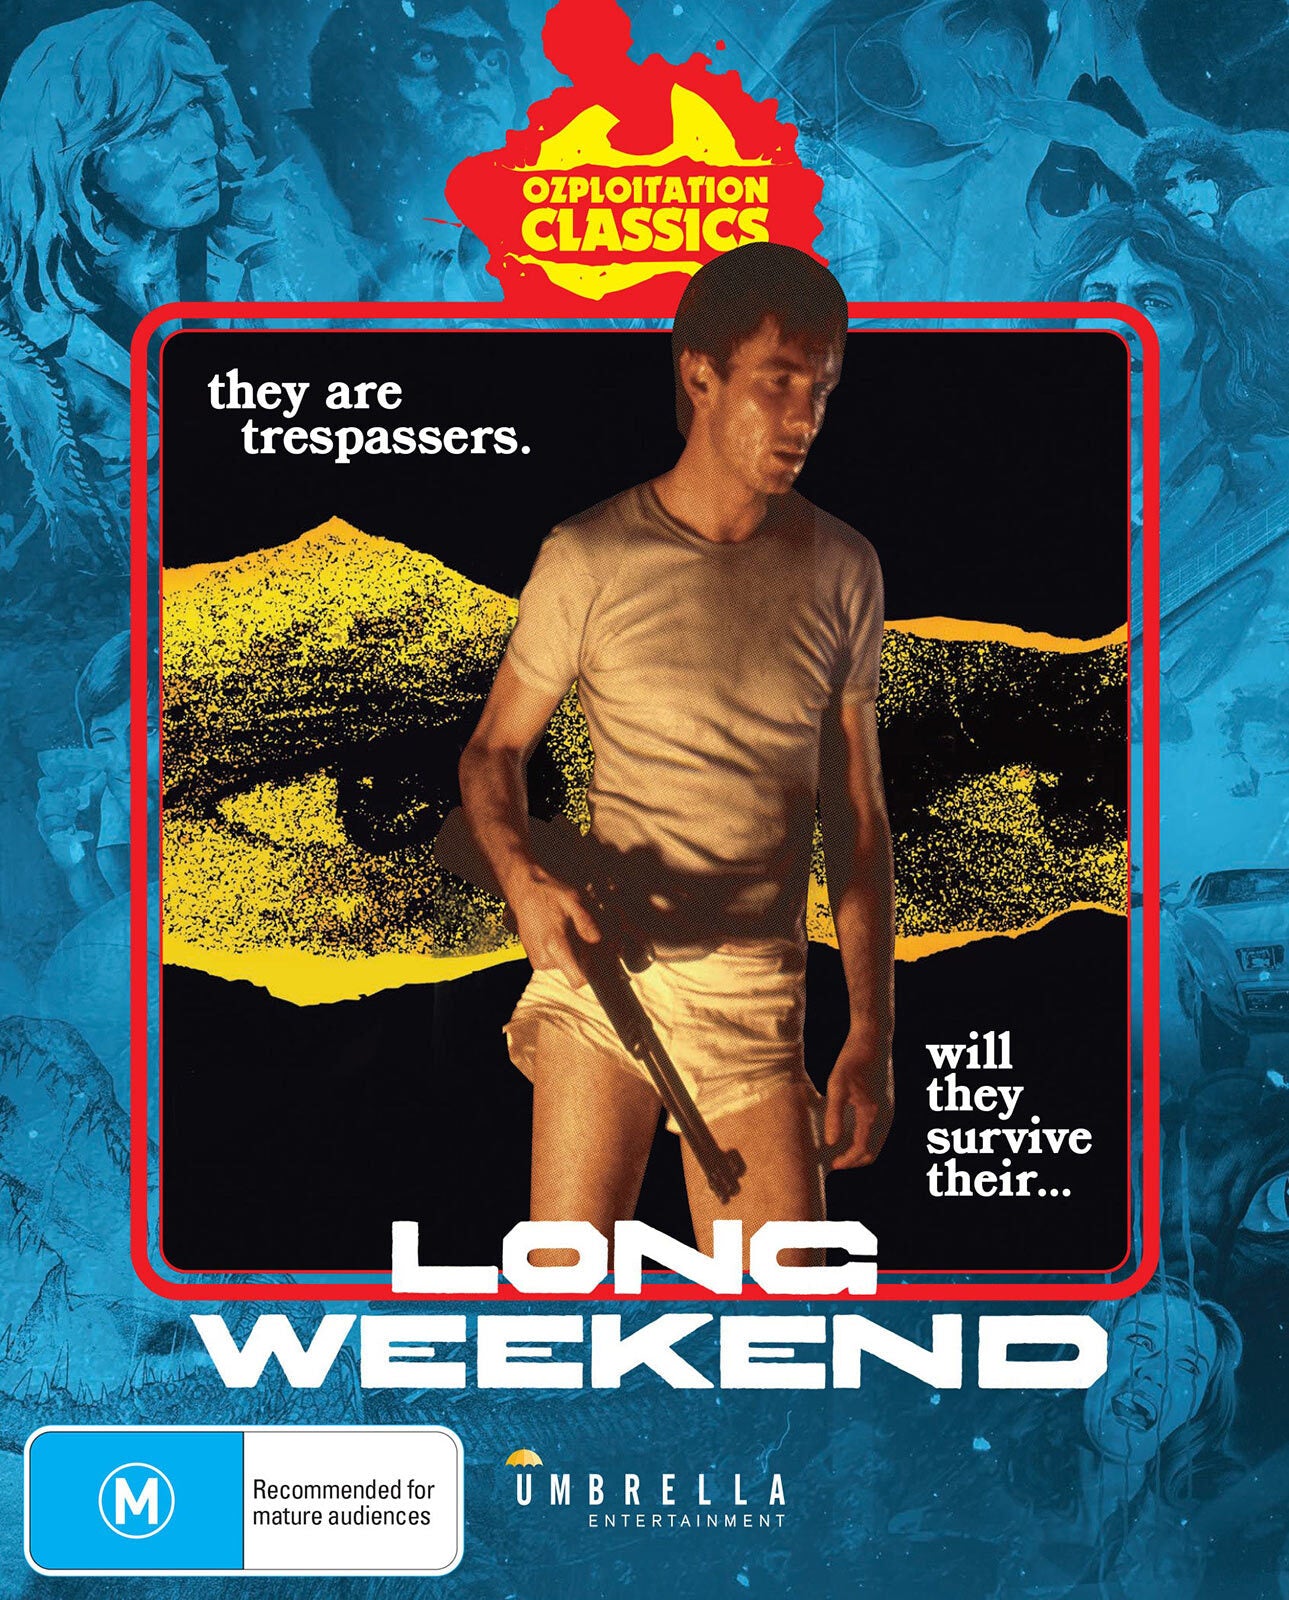 LONG WEEKEND (REGION FREE IMPORT - LIMITED EDITION) BLU-RAY/CD